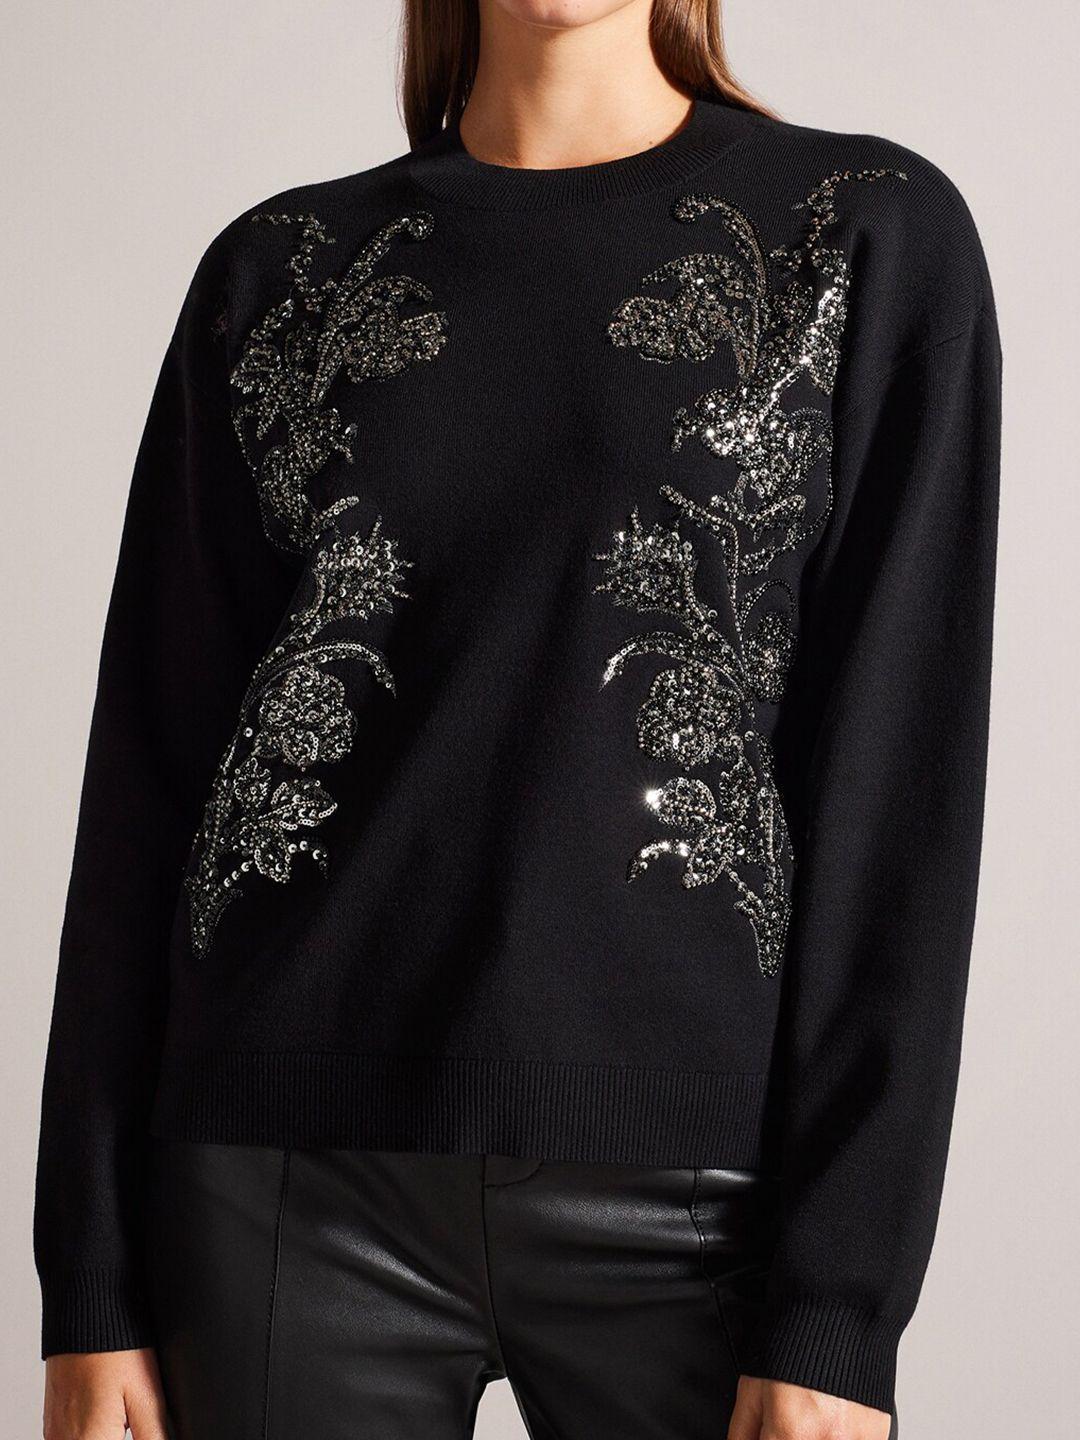 ted-baker-embroidered-round-neck-long-sleeves-embellished-pullover-sweaters